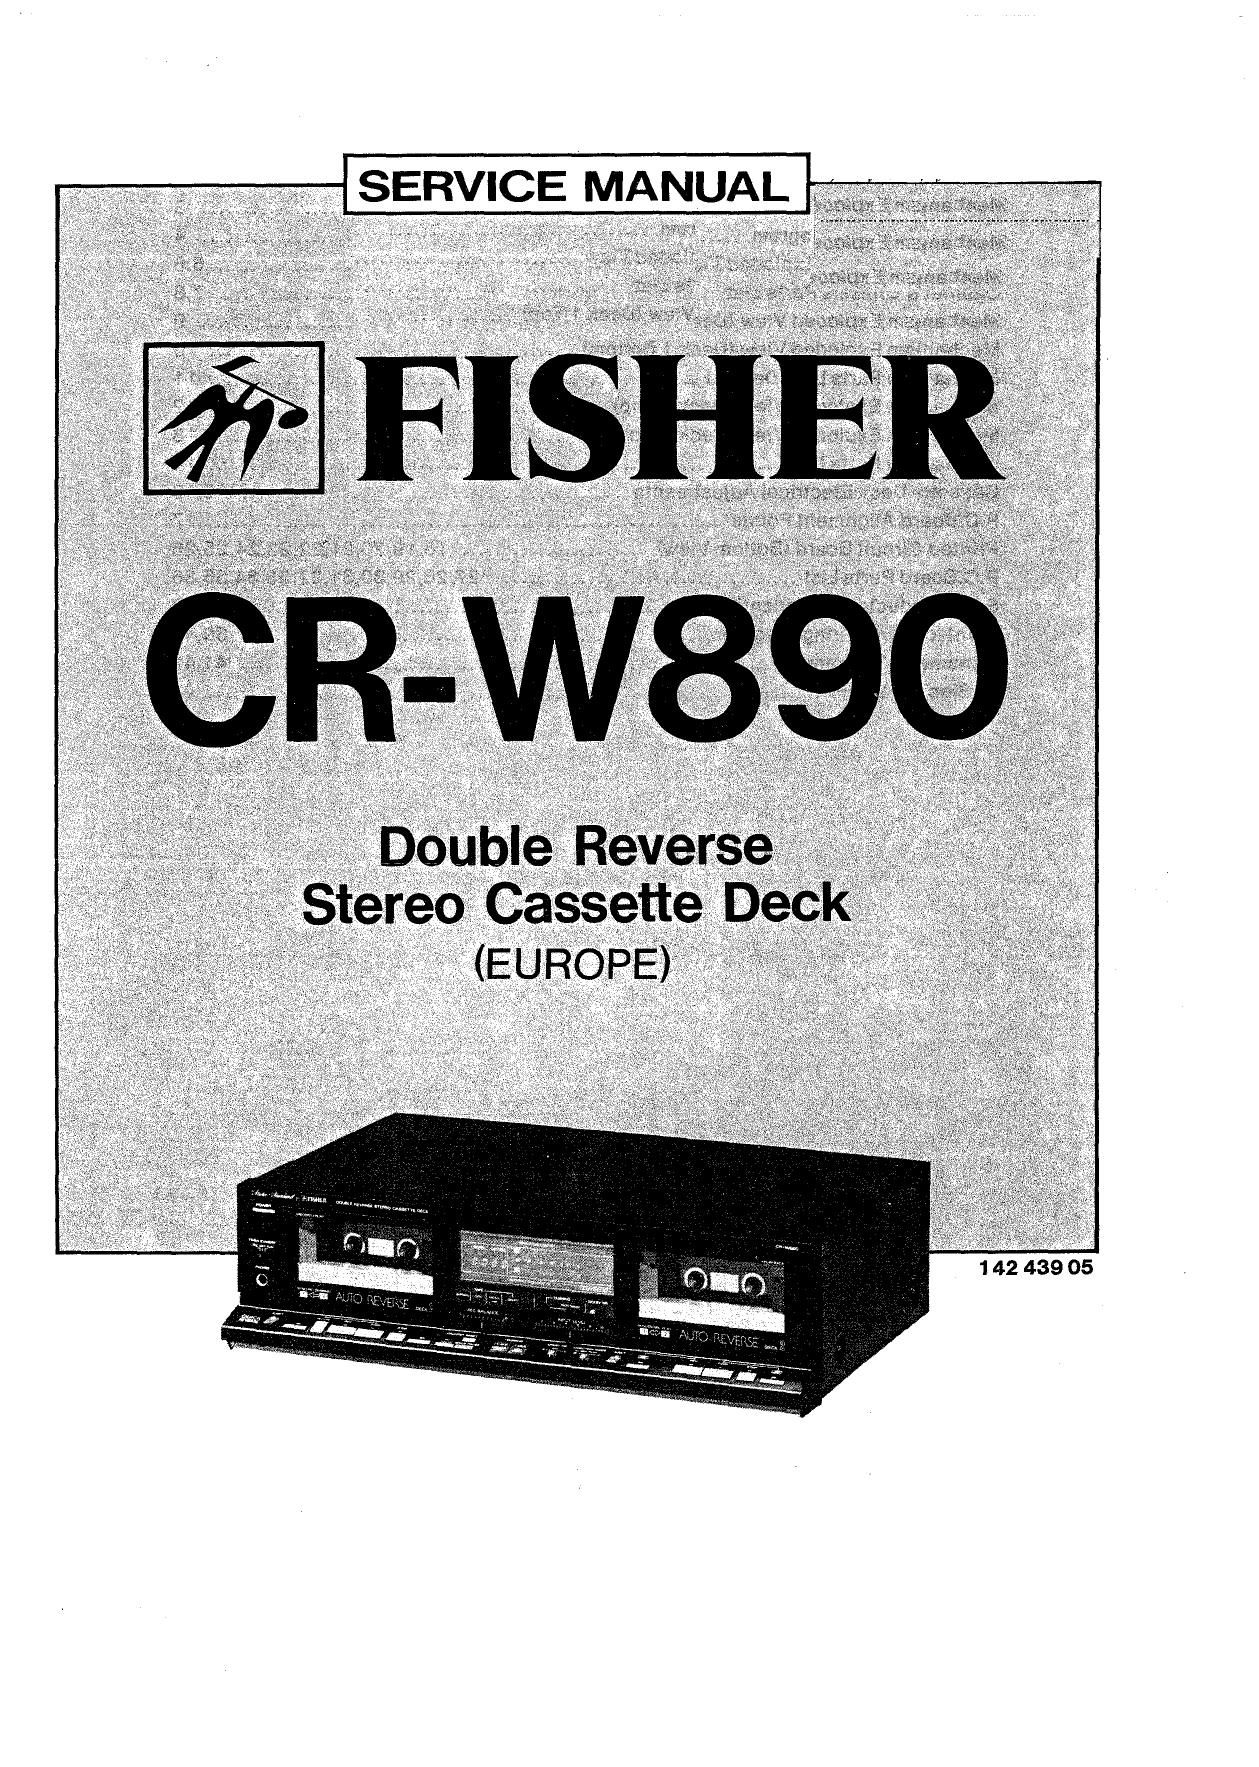 Fisher CR W890 Service Manual